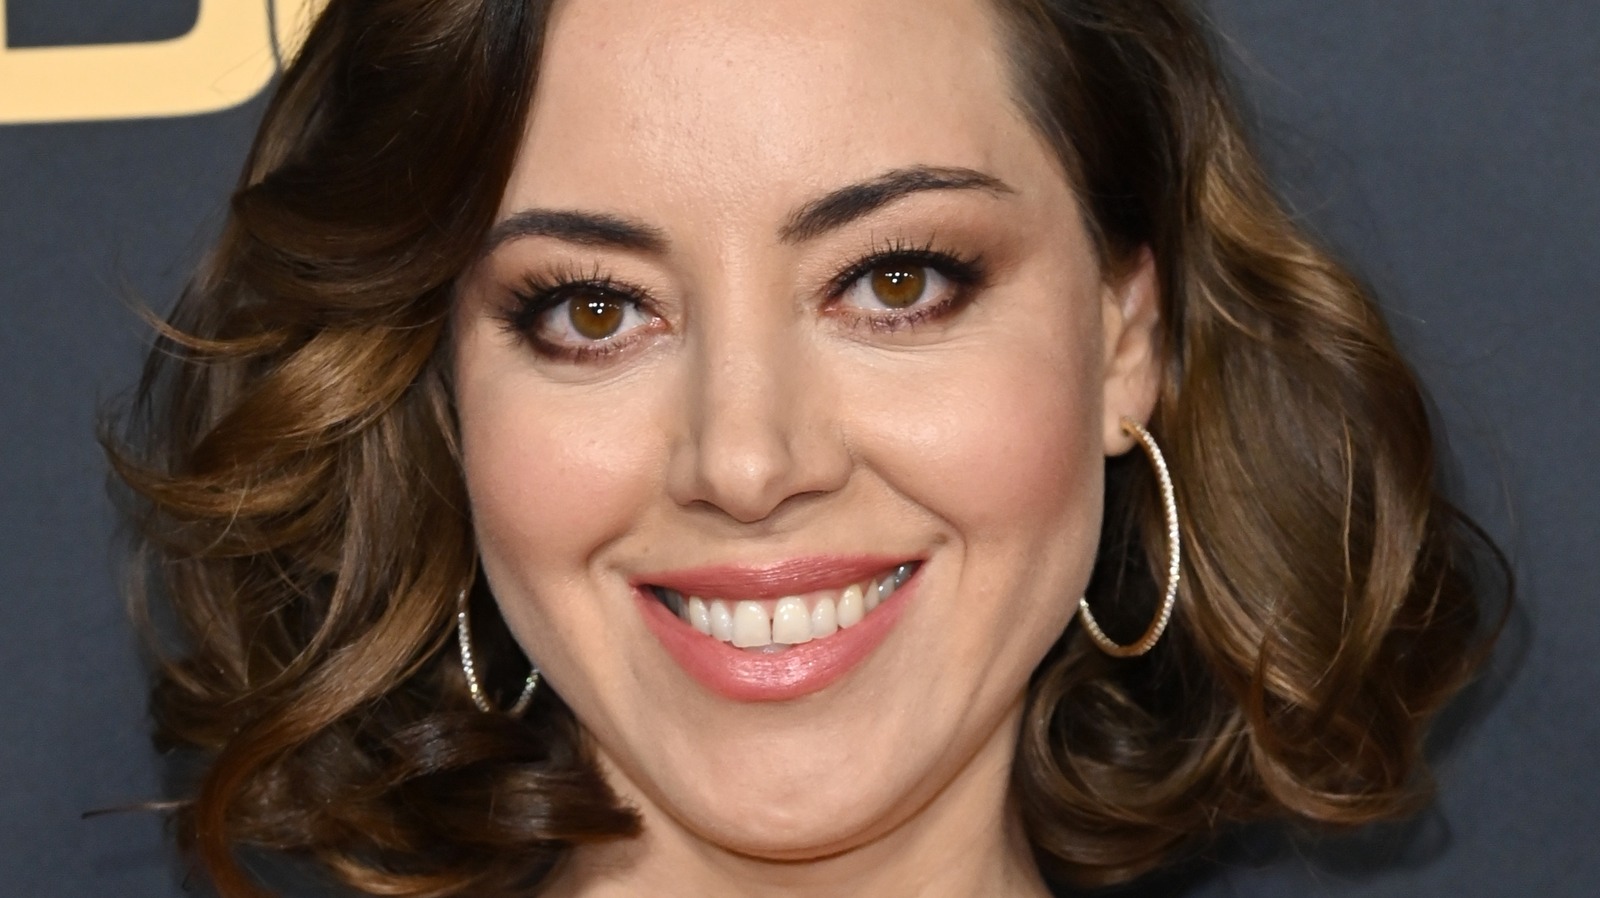 So Now The Aubrey Plaza Wood Milk Ad Apparently Violated Federal Law – Mashed